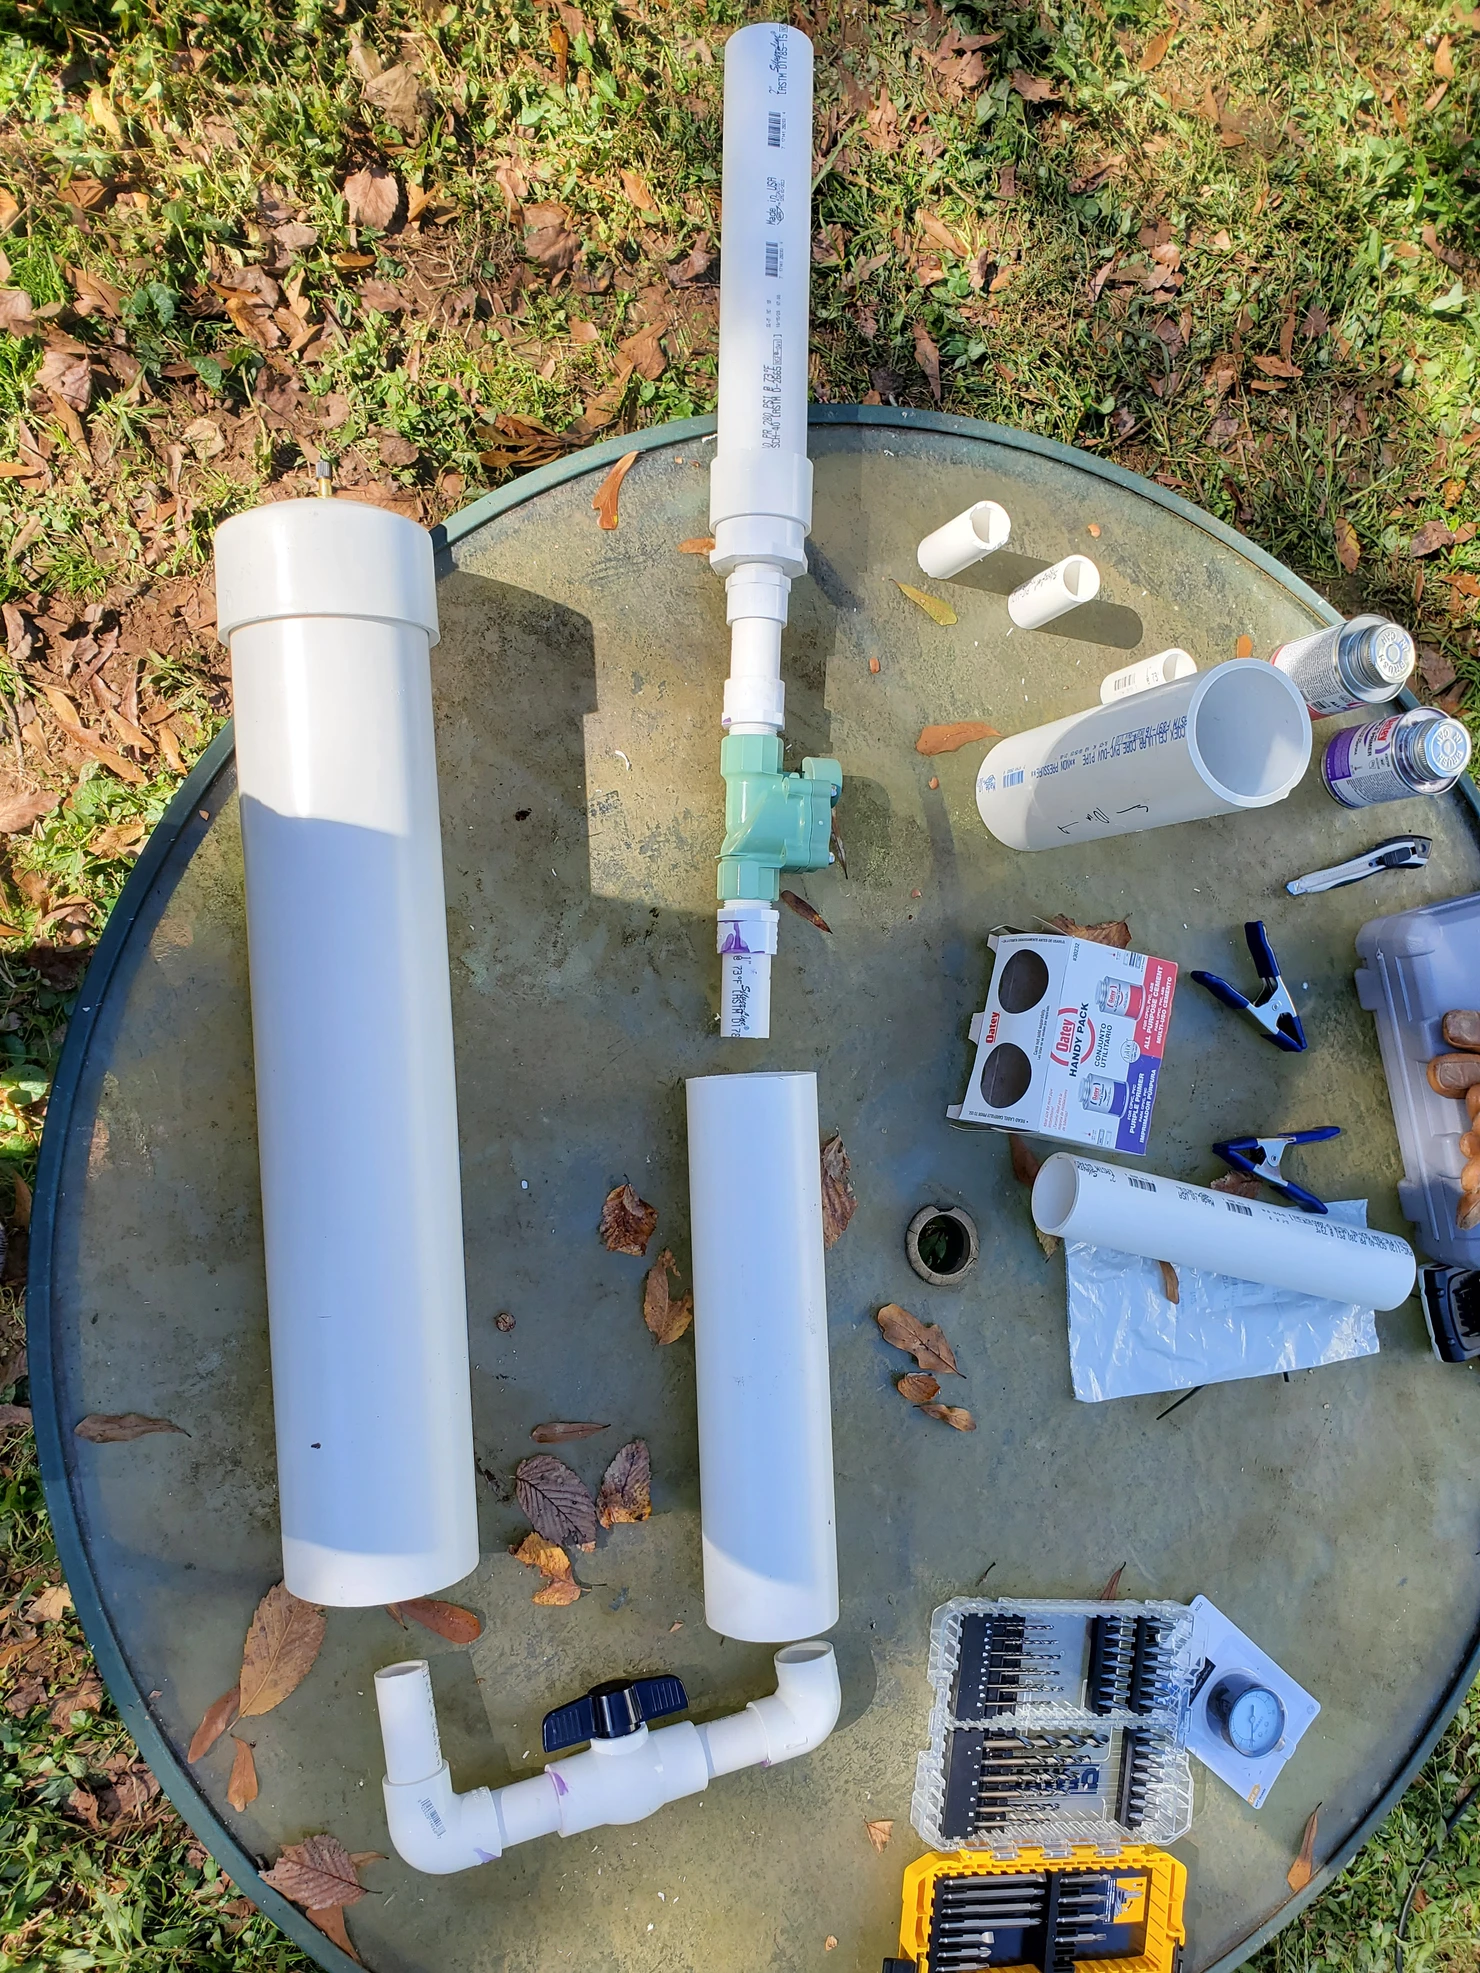 PVC pipe and other parts, partially assemblied, laid on a table